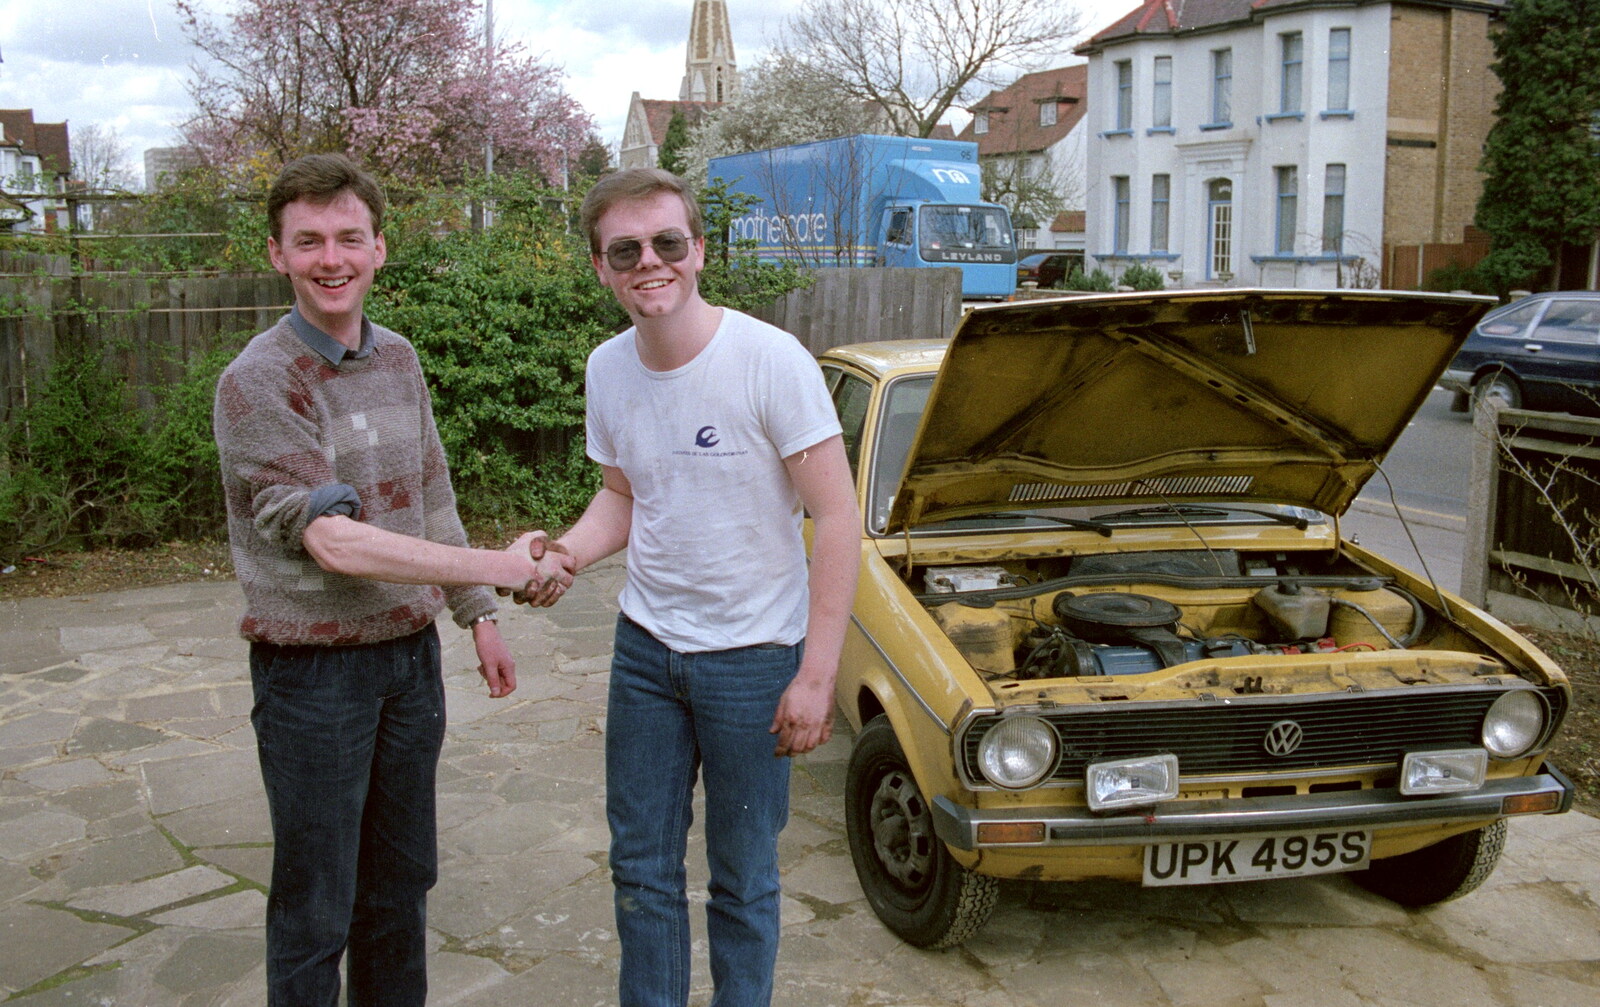 John and Dave shake hands after a successful repair from Trotsky's Birthday, New Malden, Kingston Upon Thames - 20th April 1986